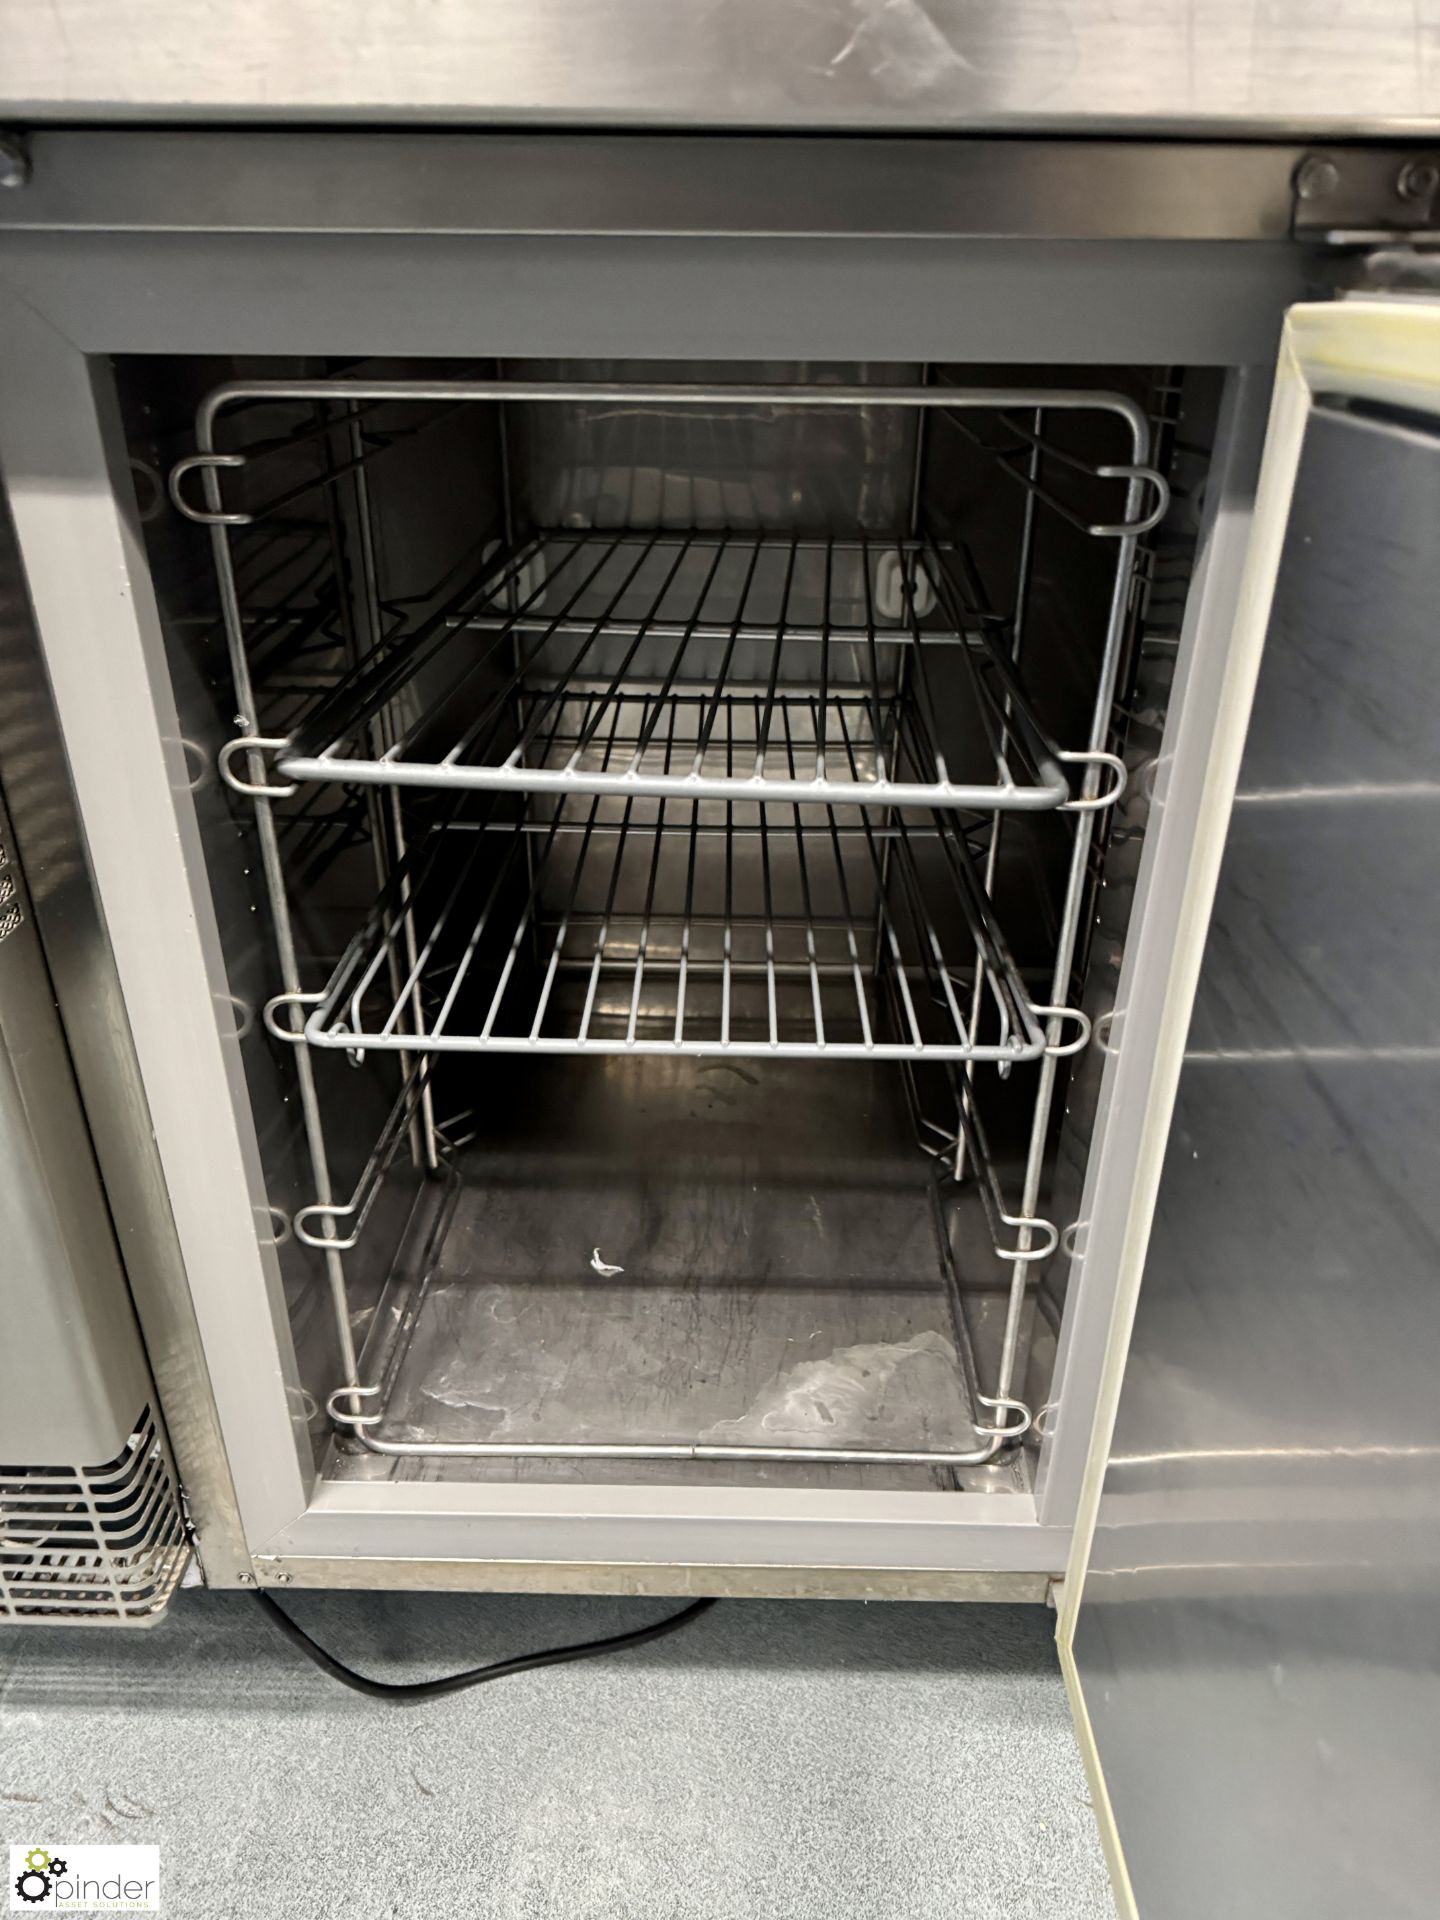 Electrolux RCDR3M30 stainless steel mobile 3-door Chilled Counter, 240volts, 1775mm x 700mm x - Image 3 of 6